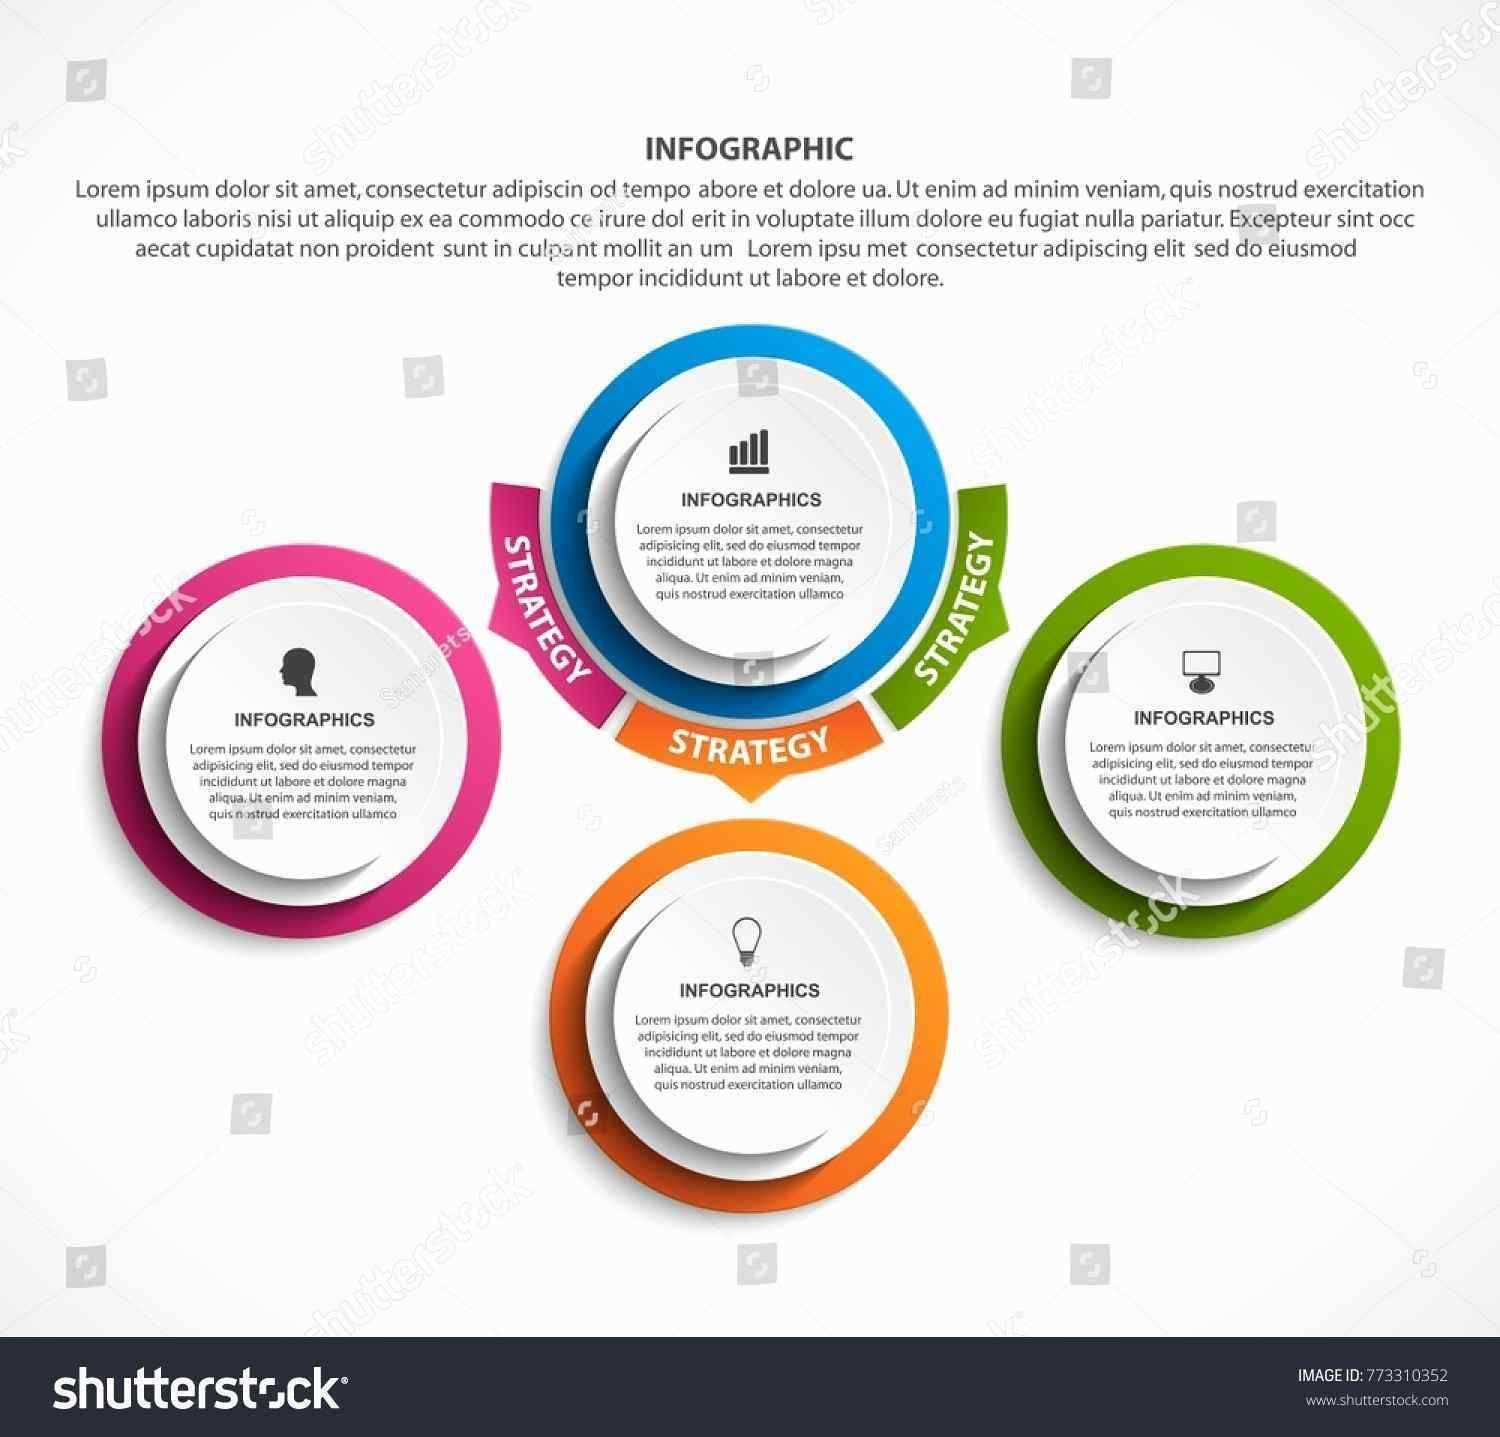 Change Infographic – Âˆš ¢Ë†å¡ Change Template Powerpoint Intended For How To Change Template In Powerpoint